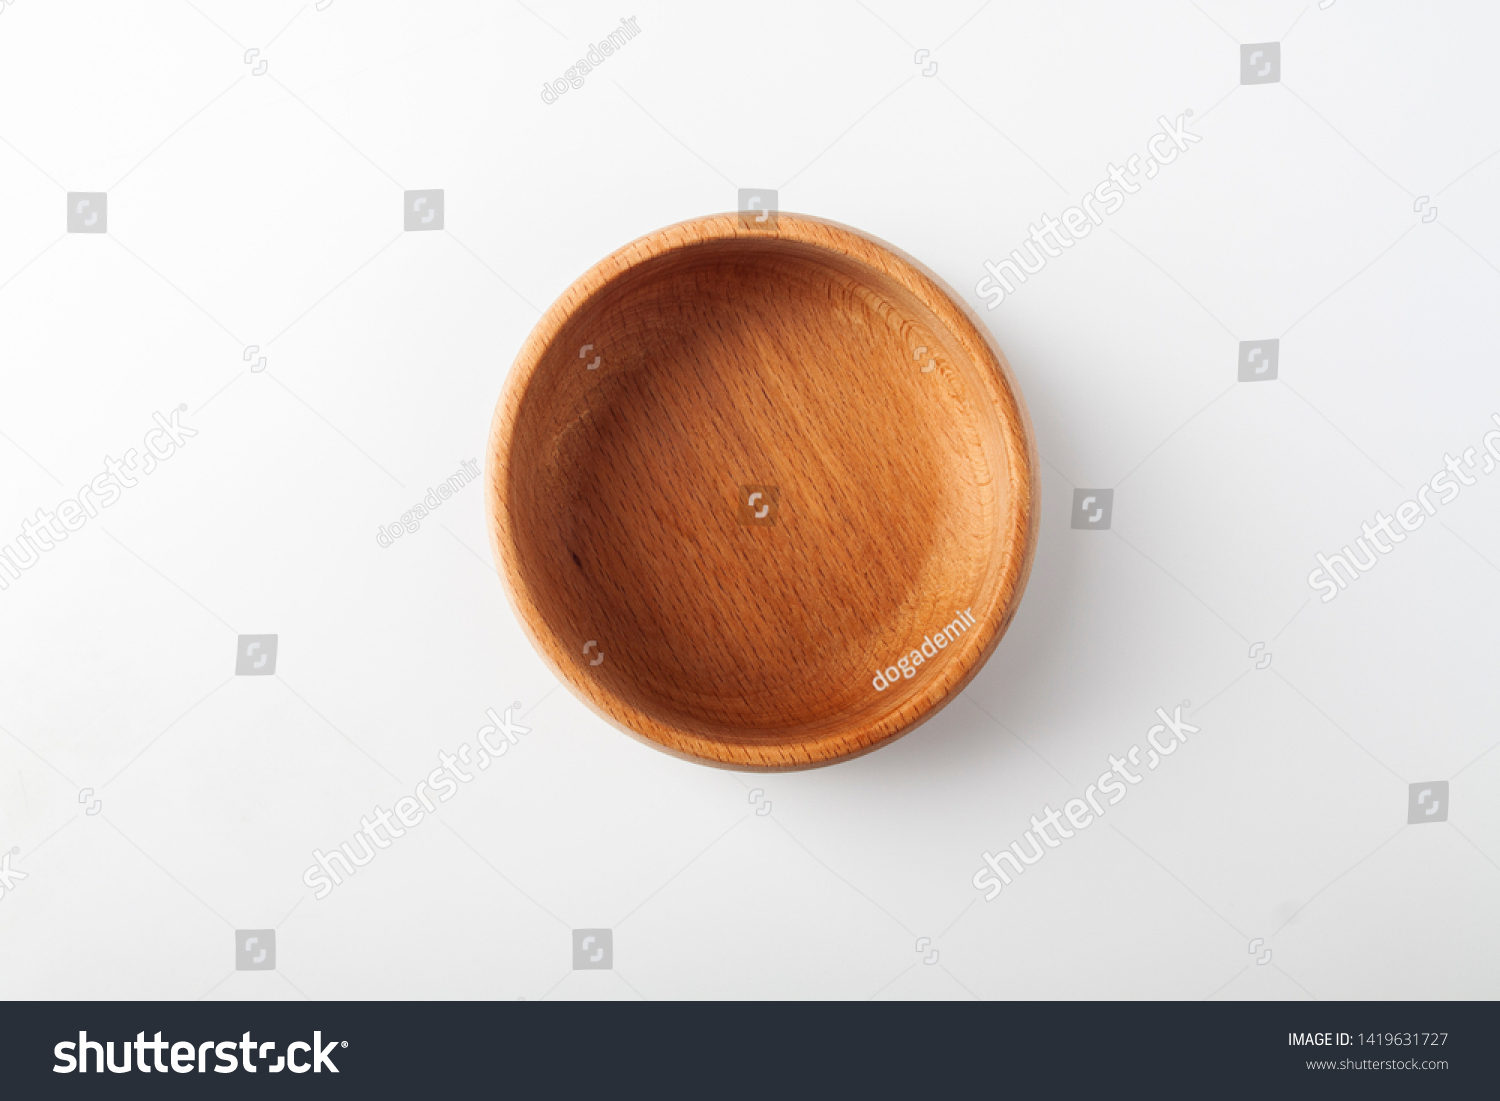 Isolated wooden bowl on white background #1419631727